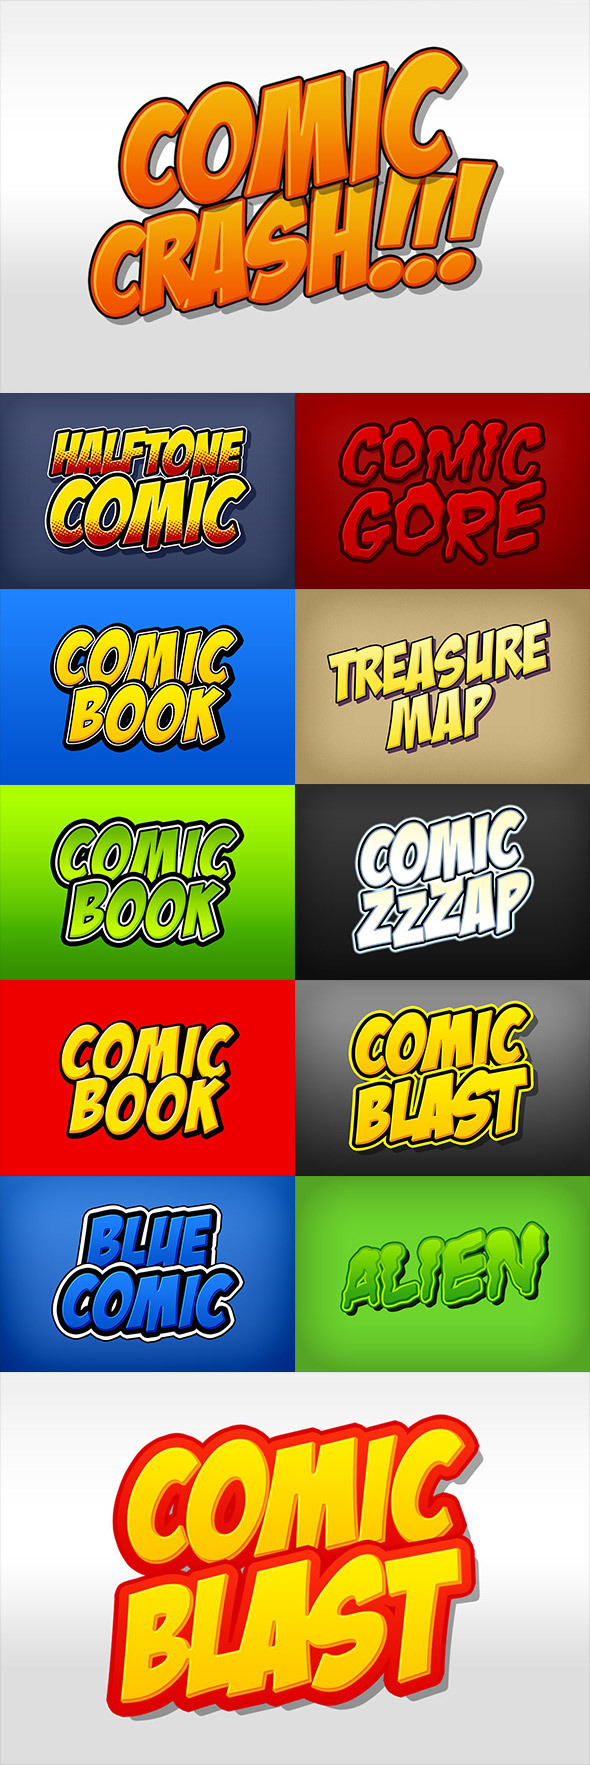 Comic book cartoon styles pack 001 collage